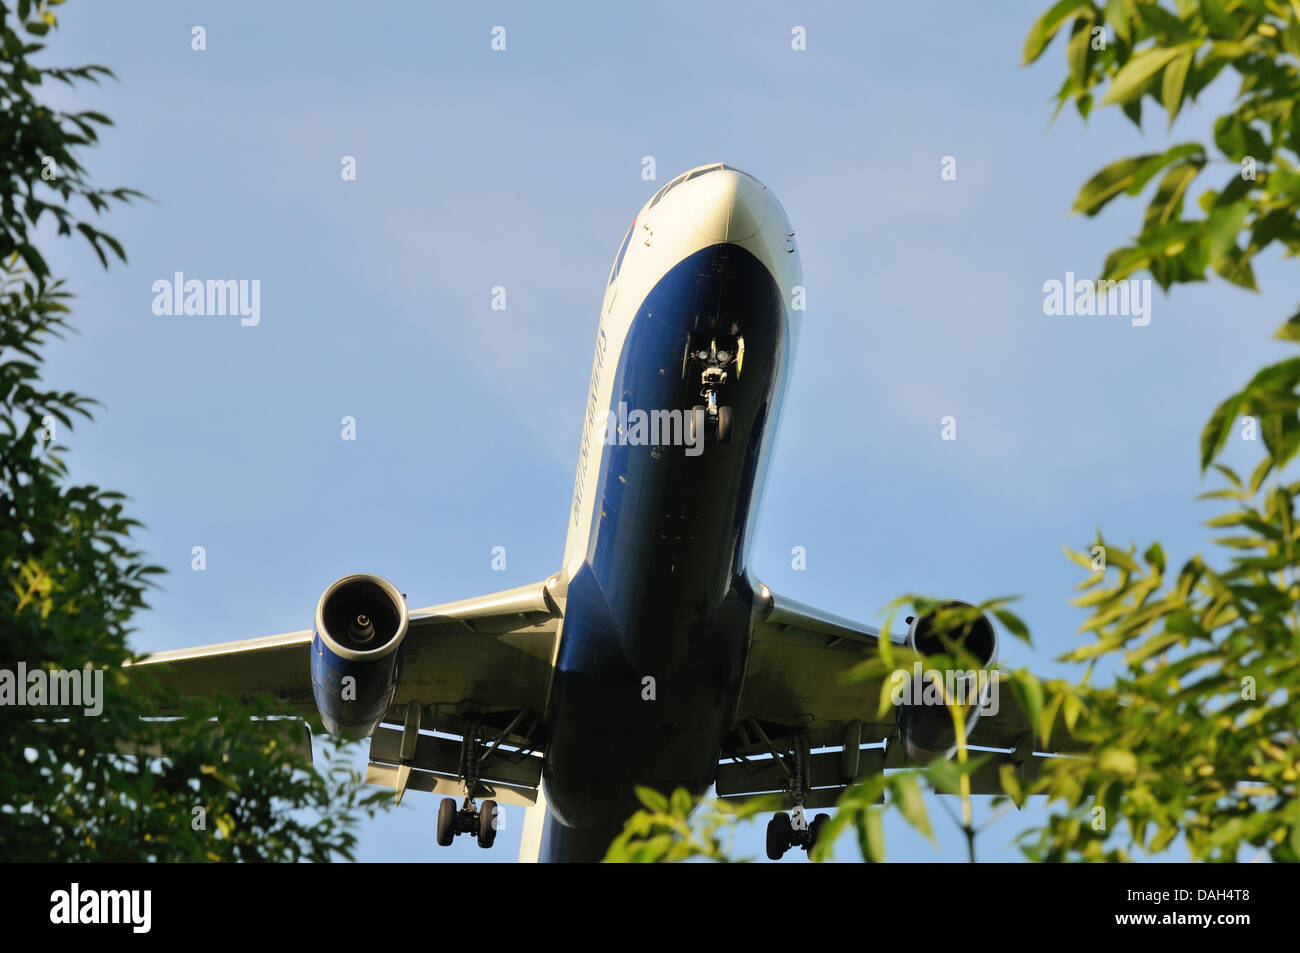 A large low-flying aircraft seconds from landing at Glasgow international airport, Scotland, UK Stock Photo